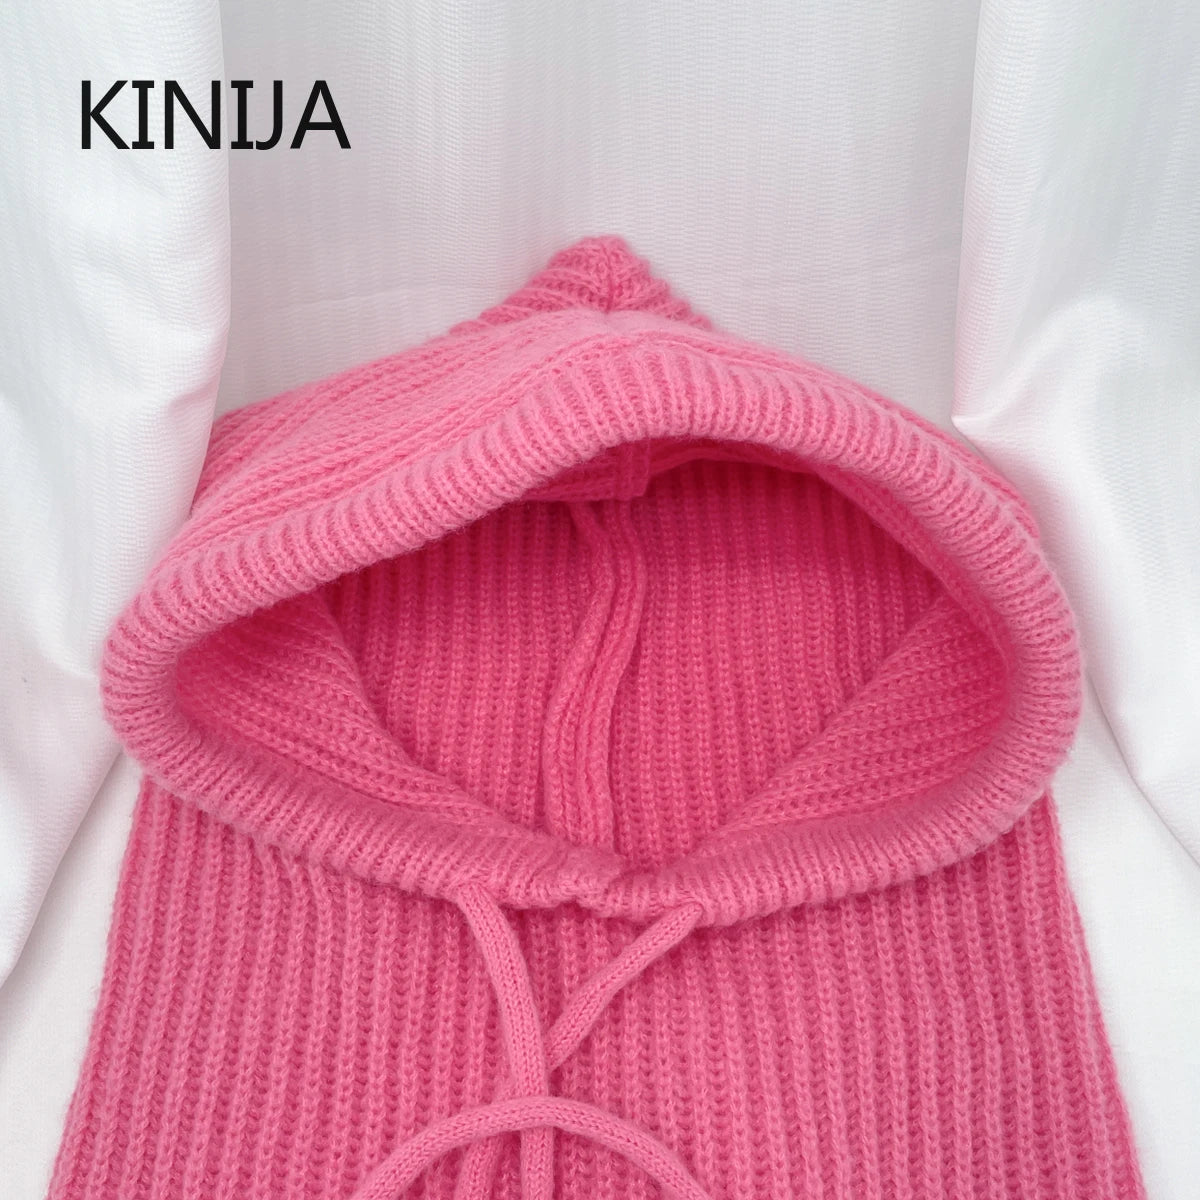 Women's Knitted Balaclava Fashion Hooded Hat: Thick Warm Beanie Winter Hat with Fake Collar Shawl